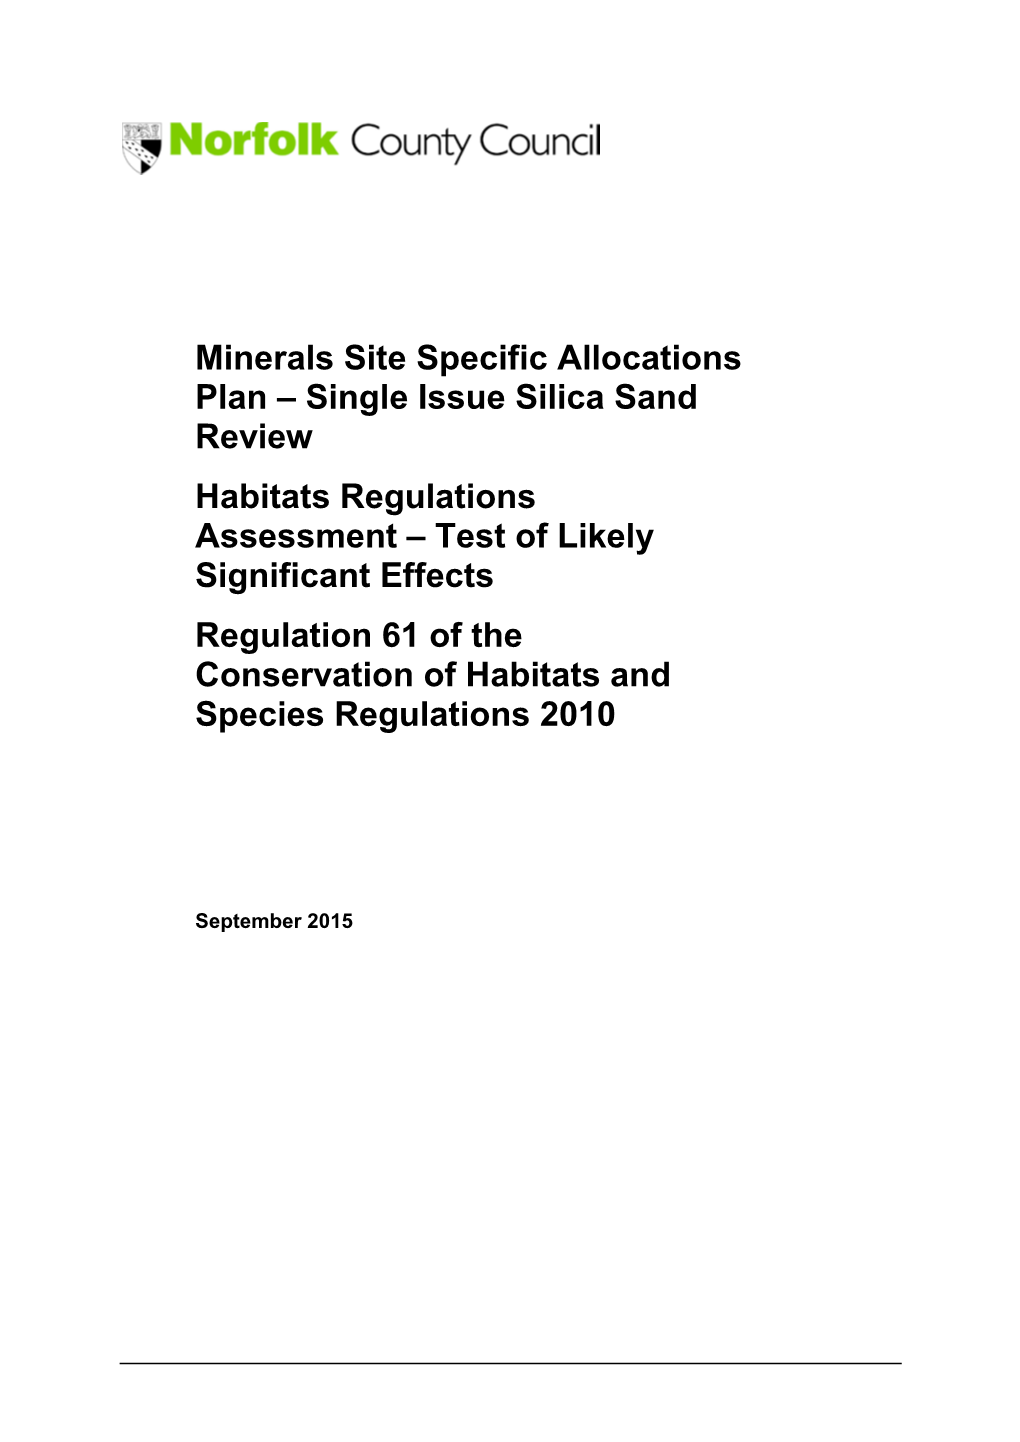 Silica Sand Review Habitats Regulations Assessment – Test of Likely Significant Effects Regulation 61 of the Conservation of Habitats and Species Regulations 2010